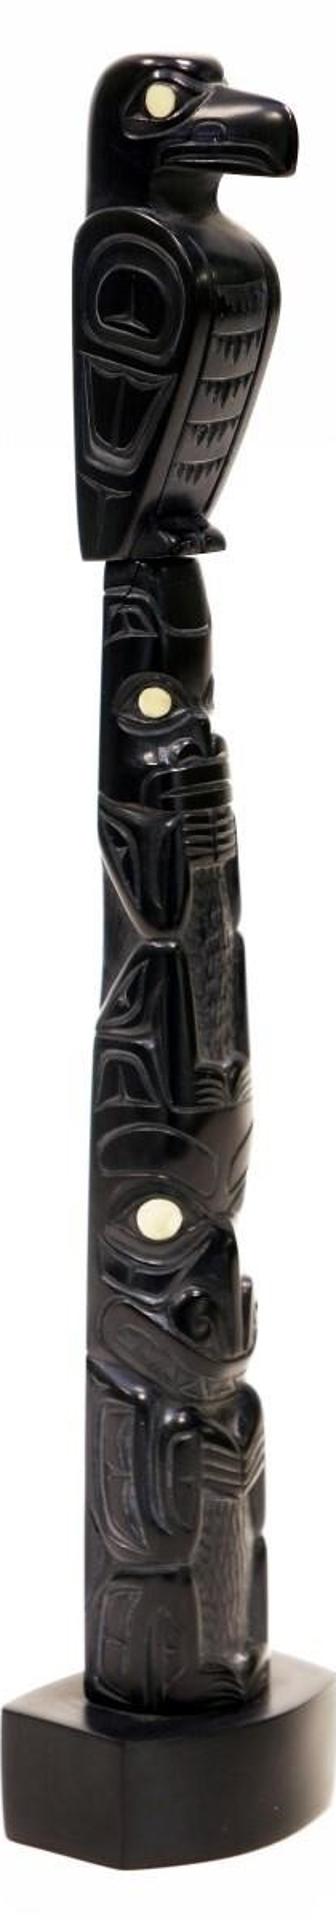 Glen Pollard (1957) - a multi-figural carved argillite Totem, with abalone inlays, depicting an Eagle and Two Bears